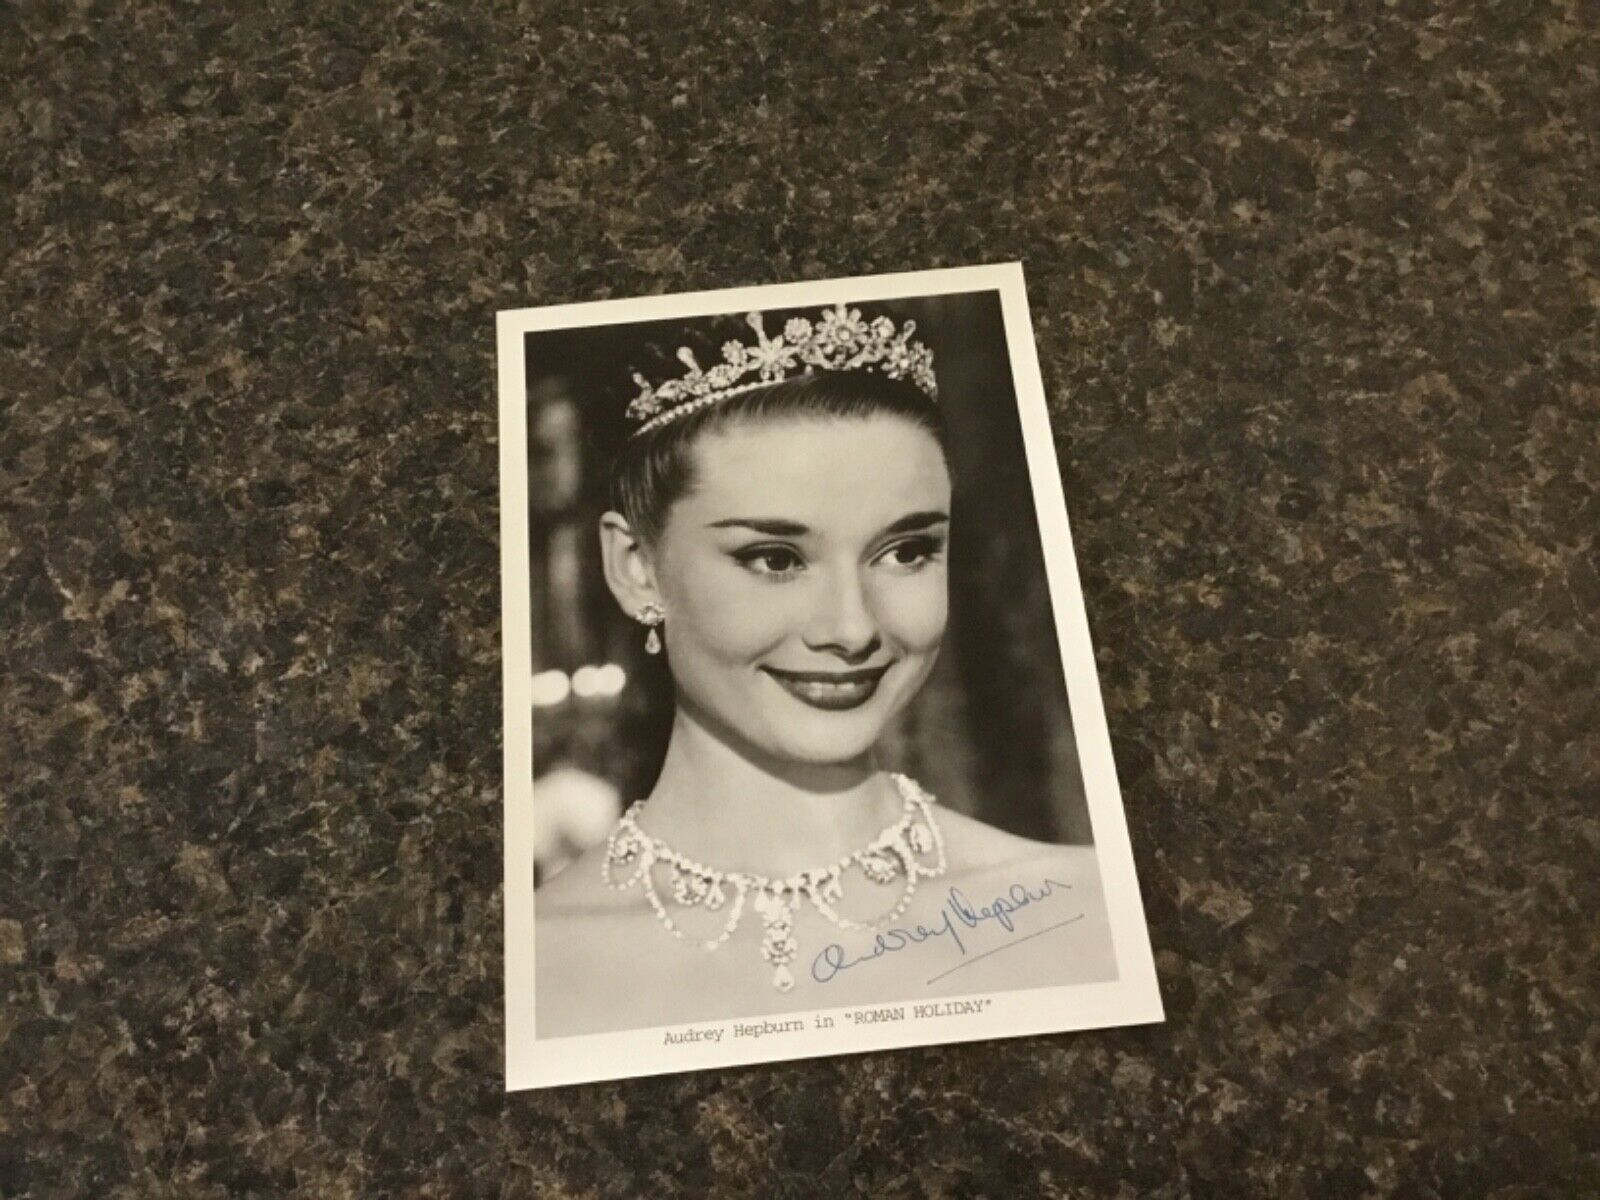 Audrey Hepburn signed photo /print of Roman Holiday 5x7 black and white